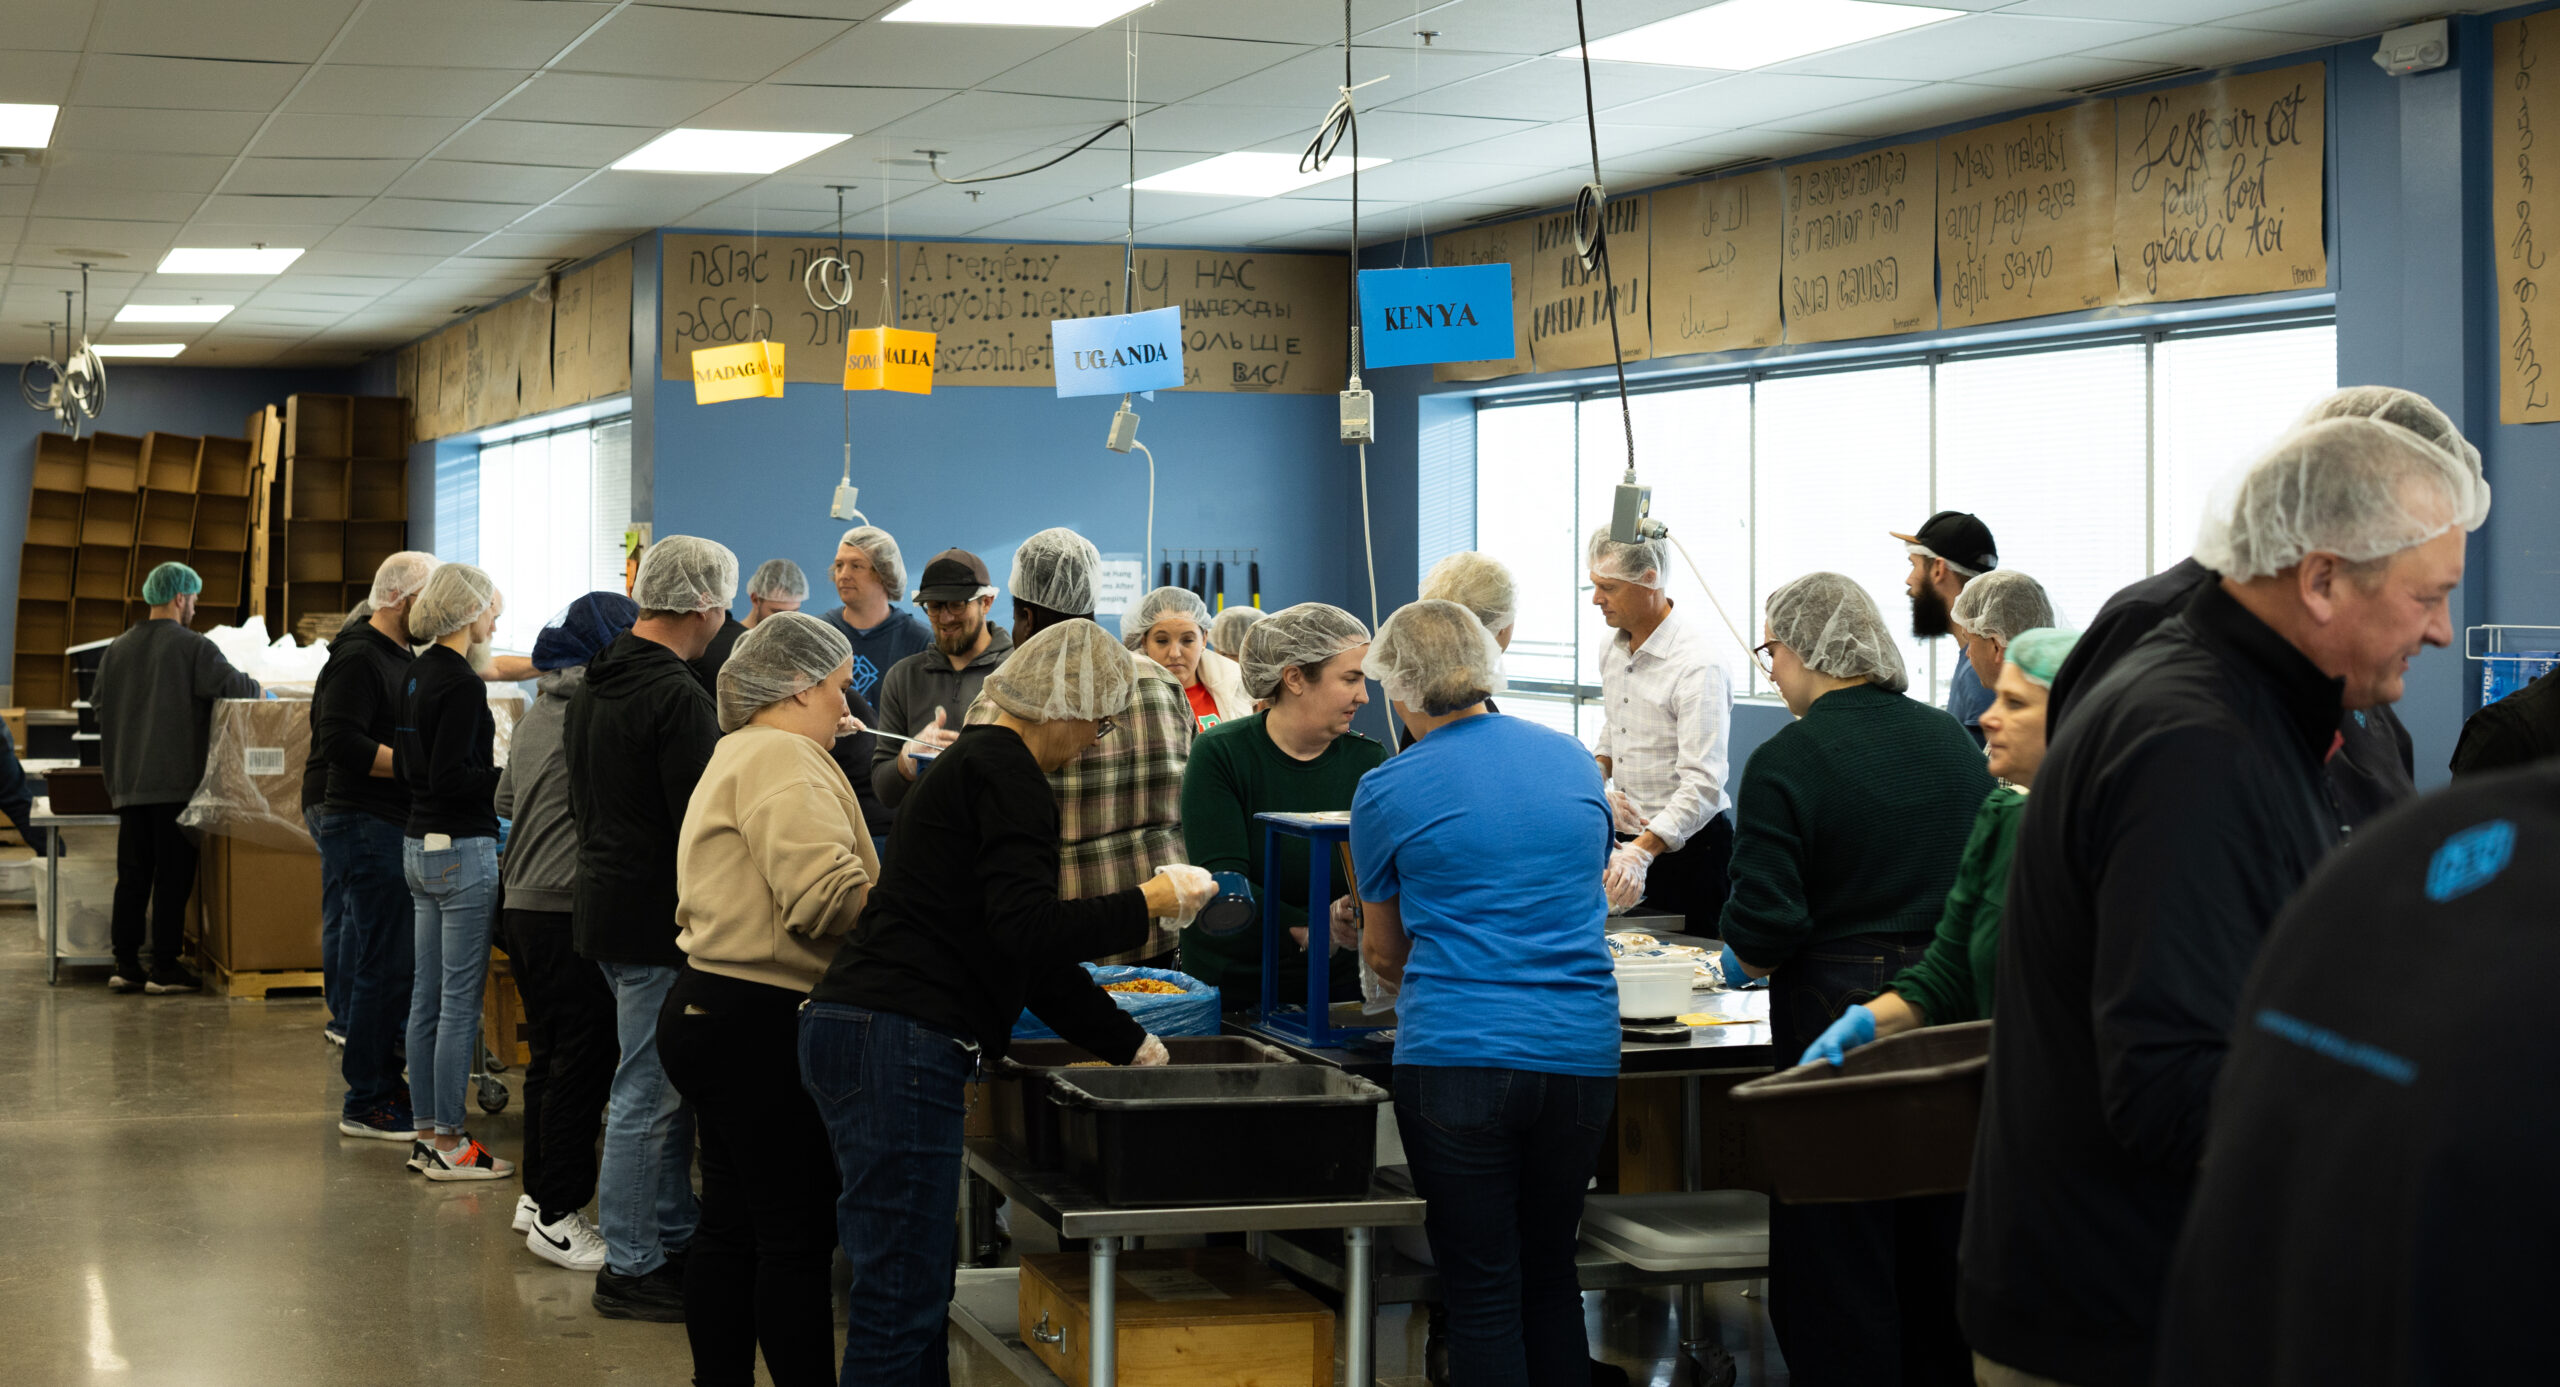 A group of people wearing hairnets packing food into bags and boxes for Feed My Starving Children.